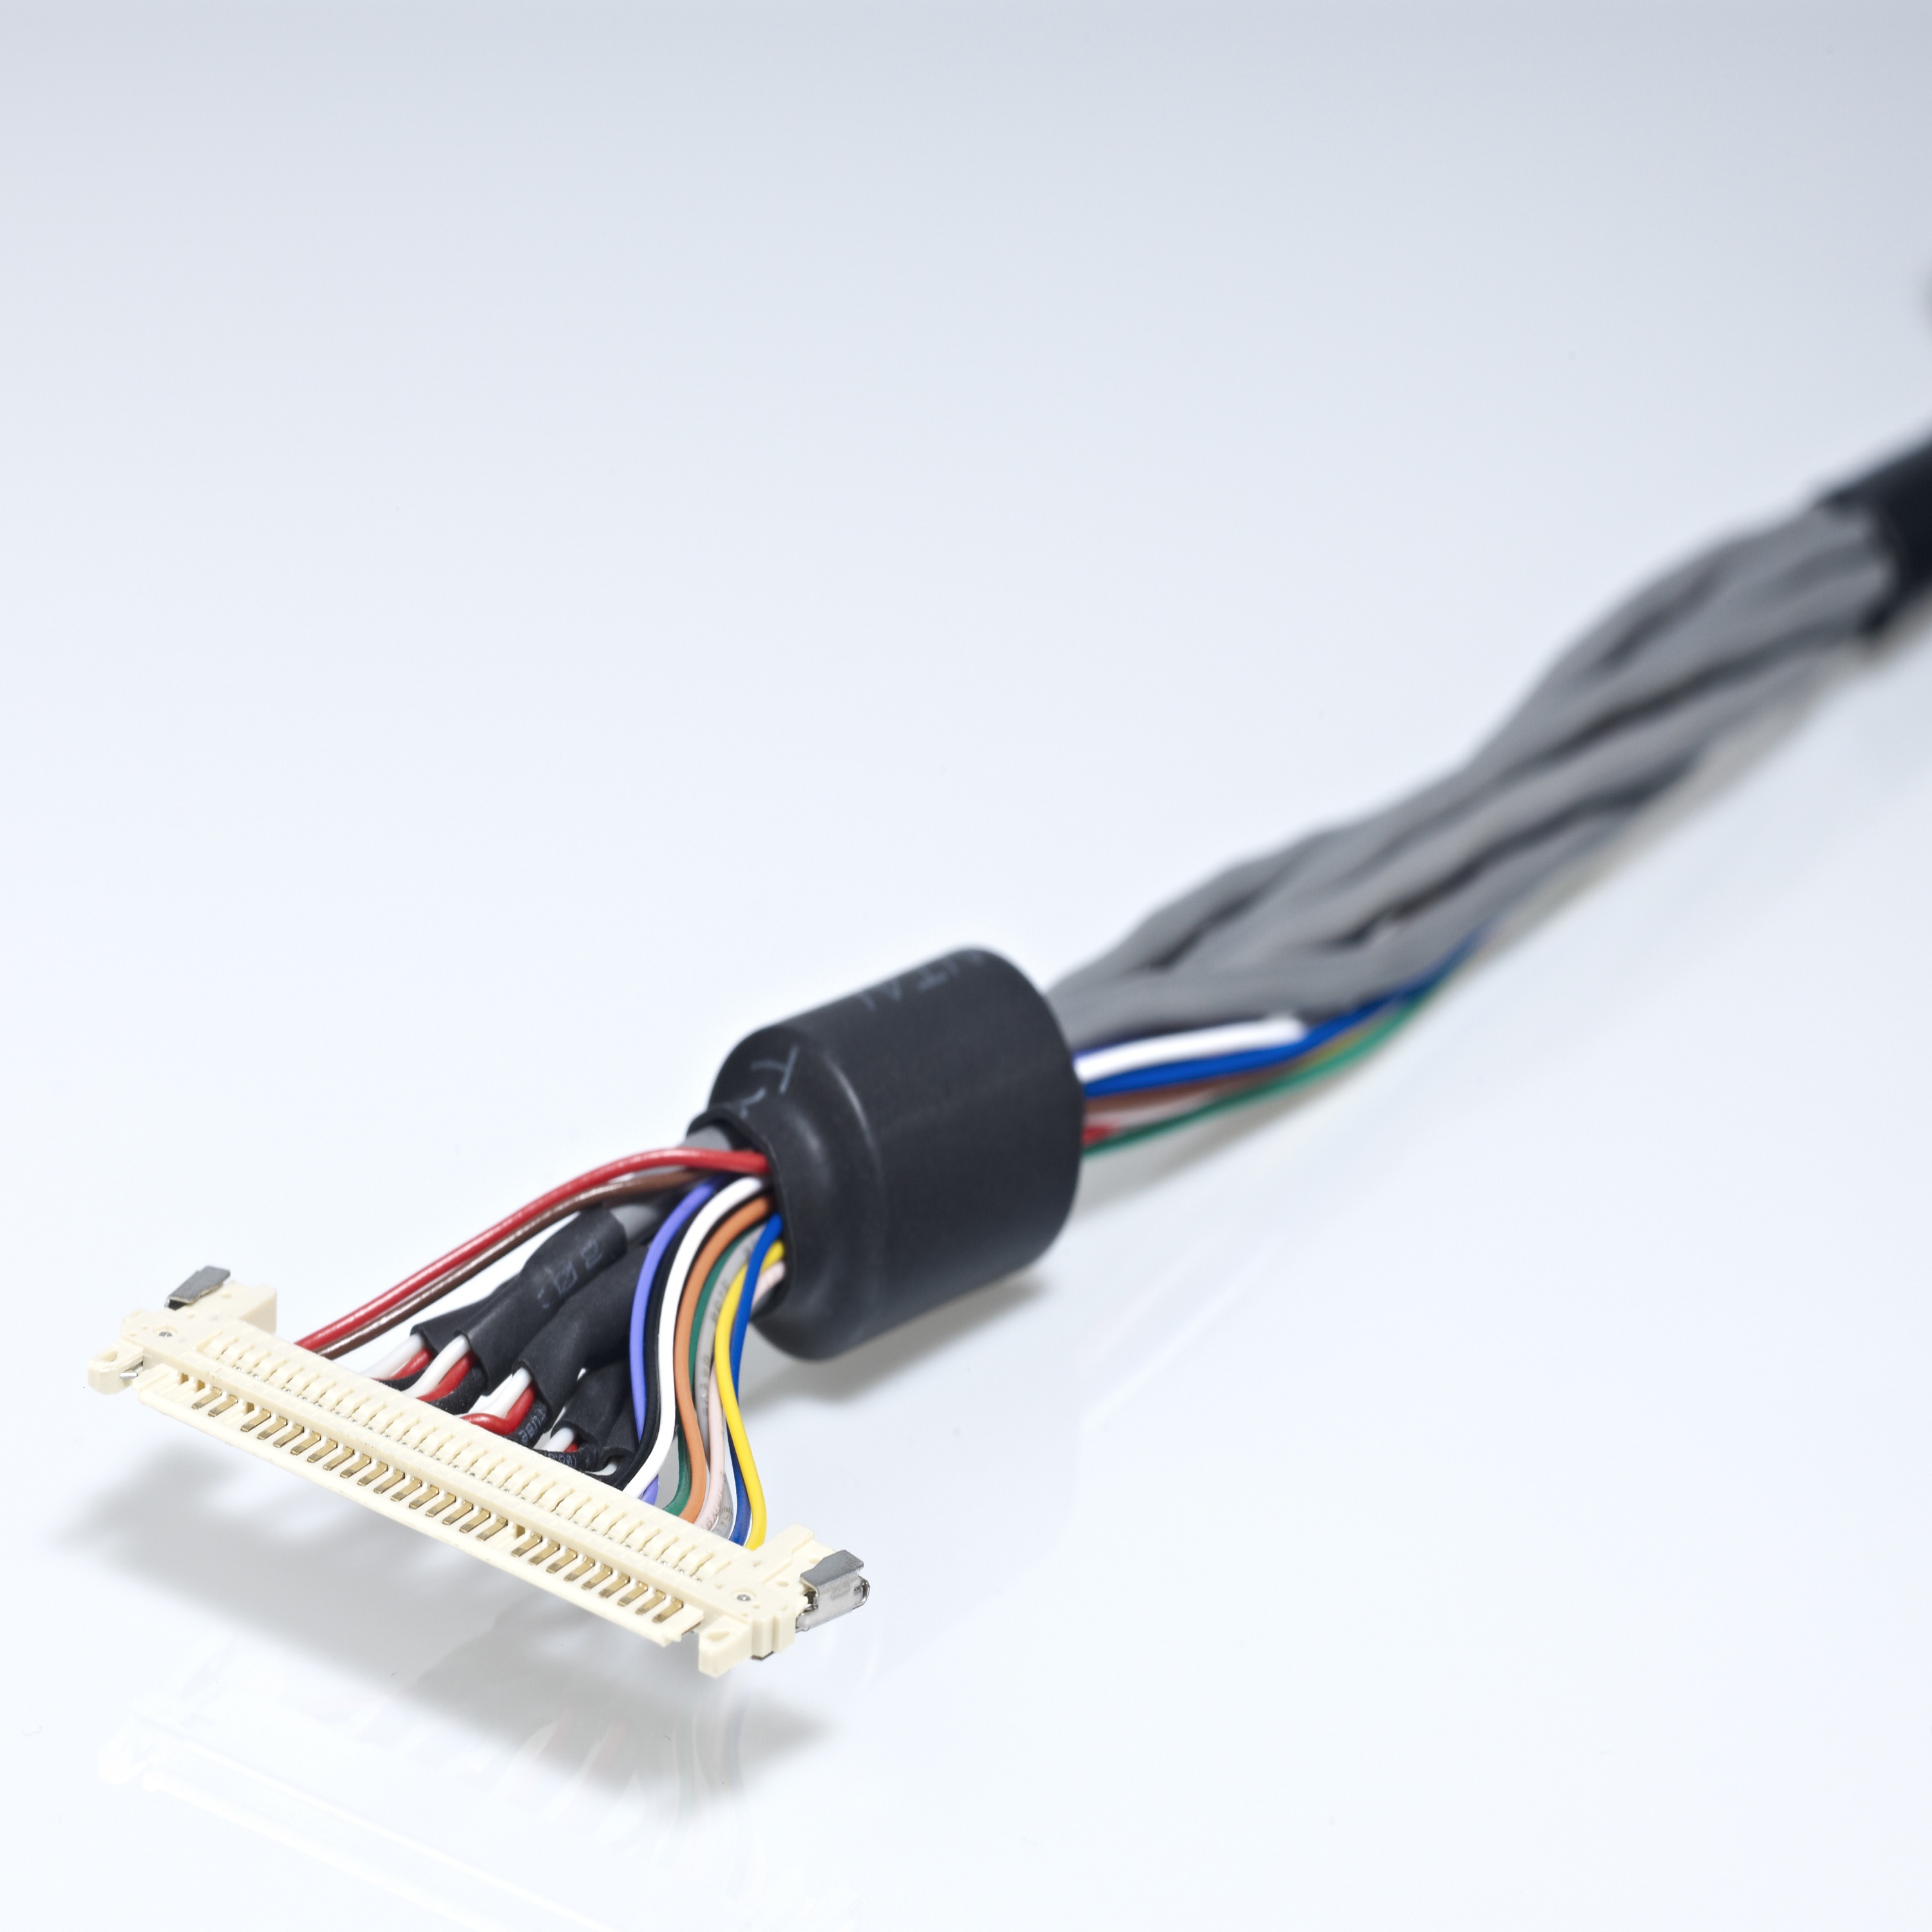 Custom tailored LVDS Cable, Custom tailored Display cable, Cables Assembly with JAE, Cable Assembly with Hirose